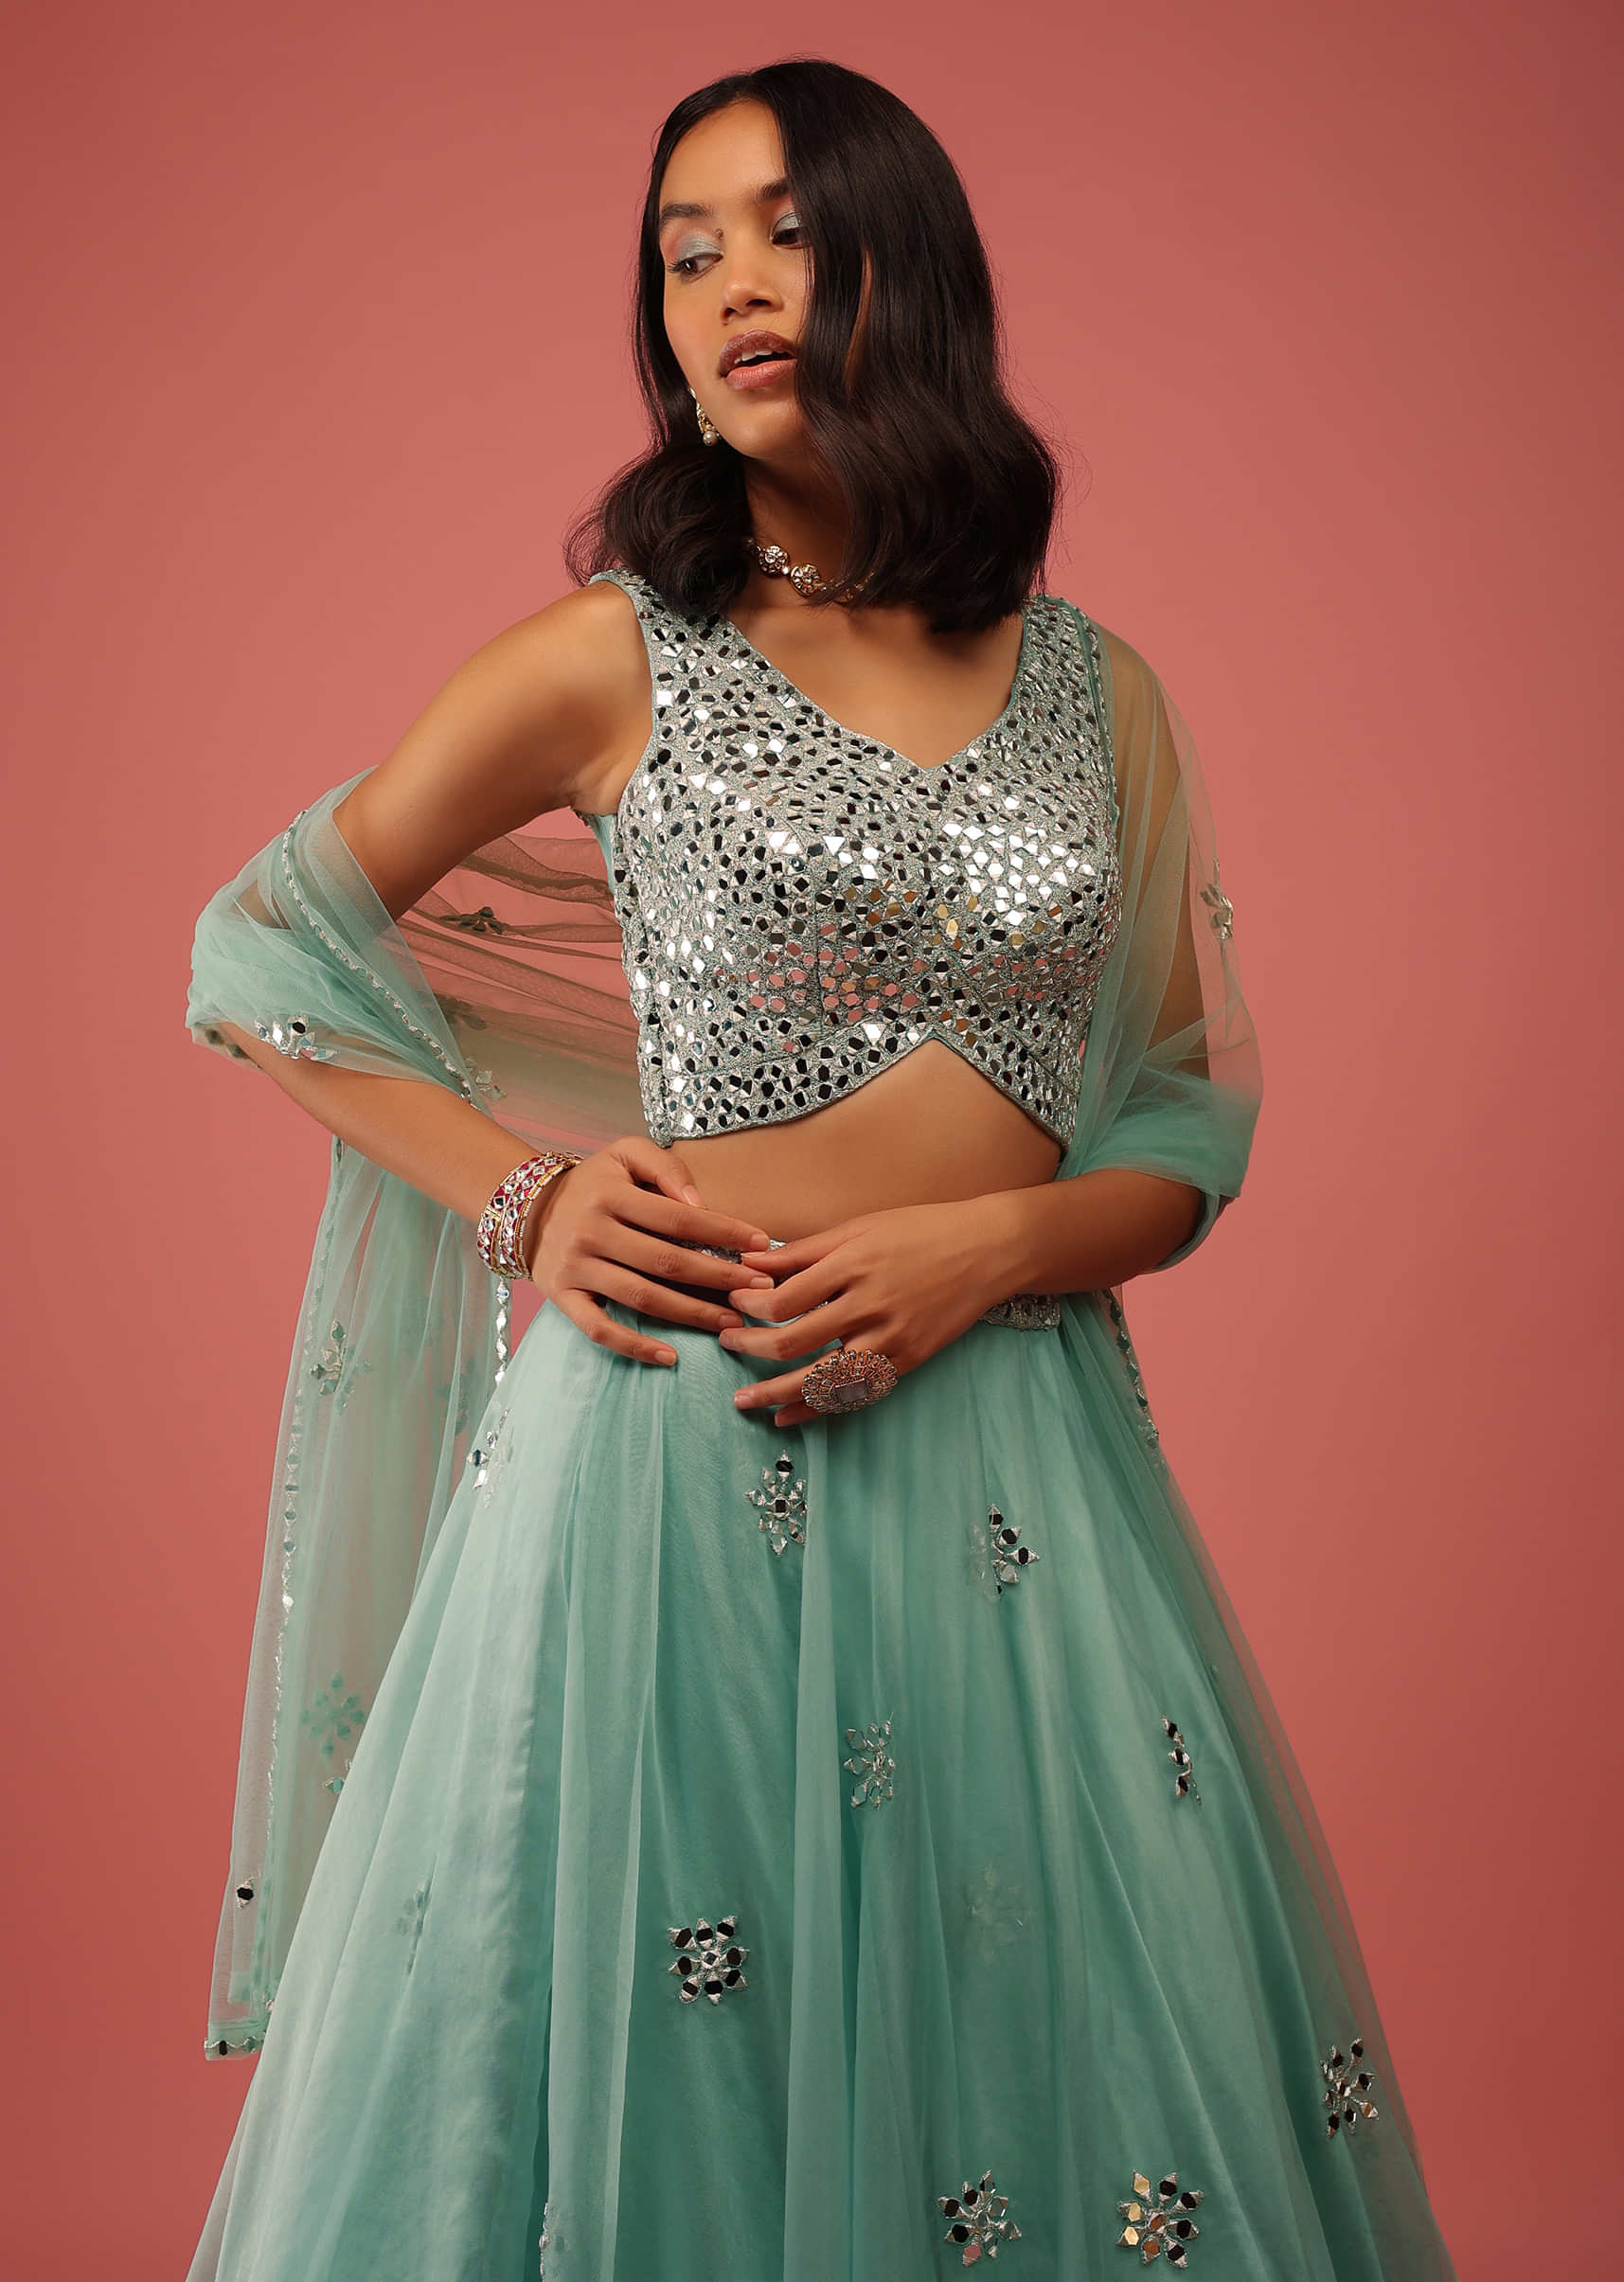 Sea Green Lehenga In Organza With A Heavily Embroidered Crop Top In Mirror Work